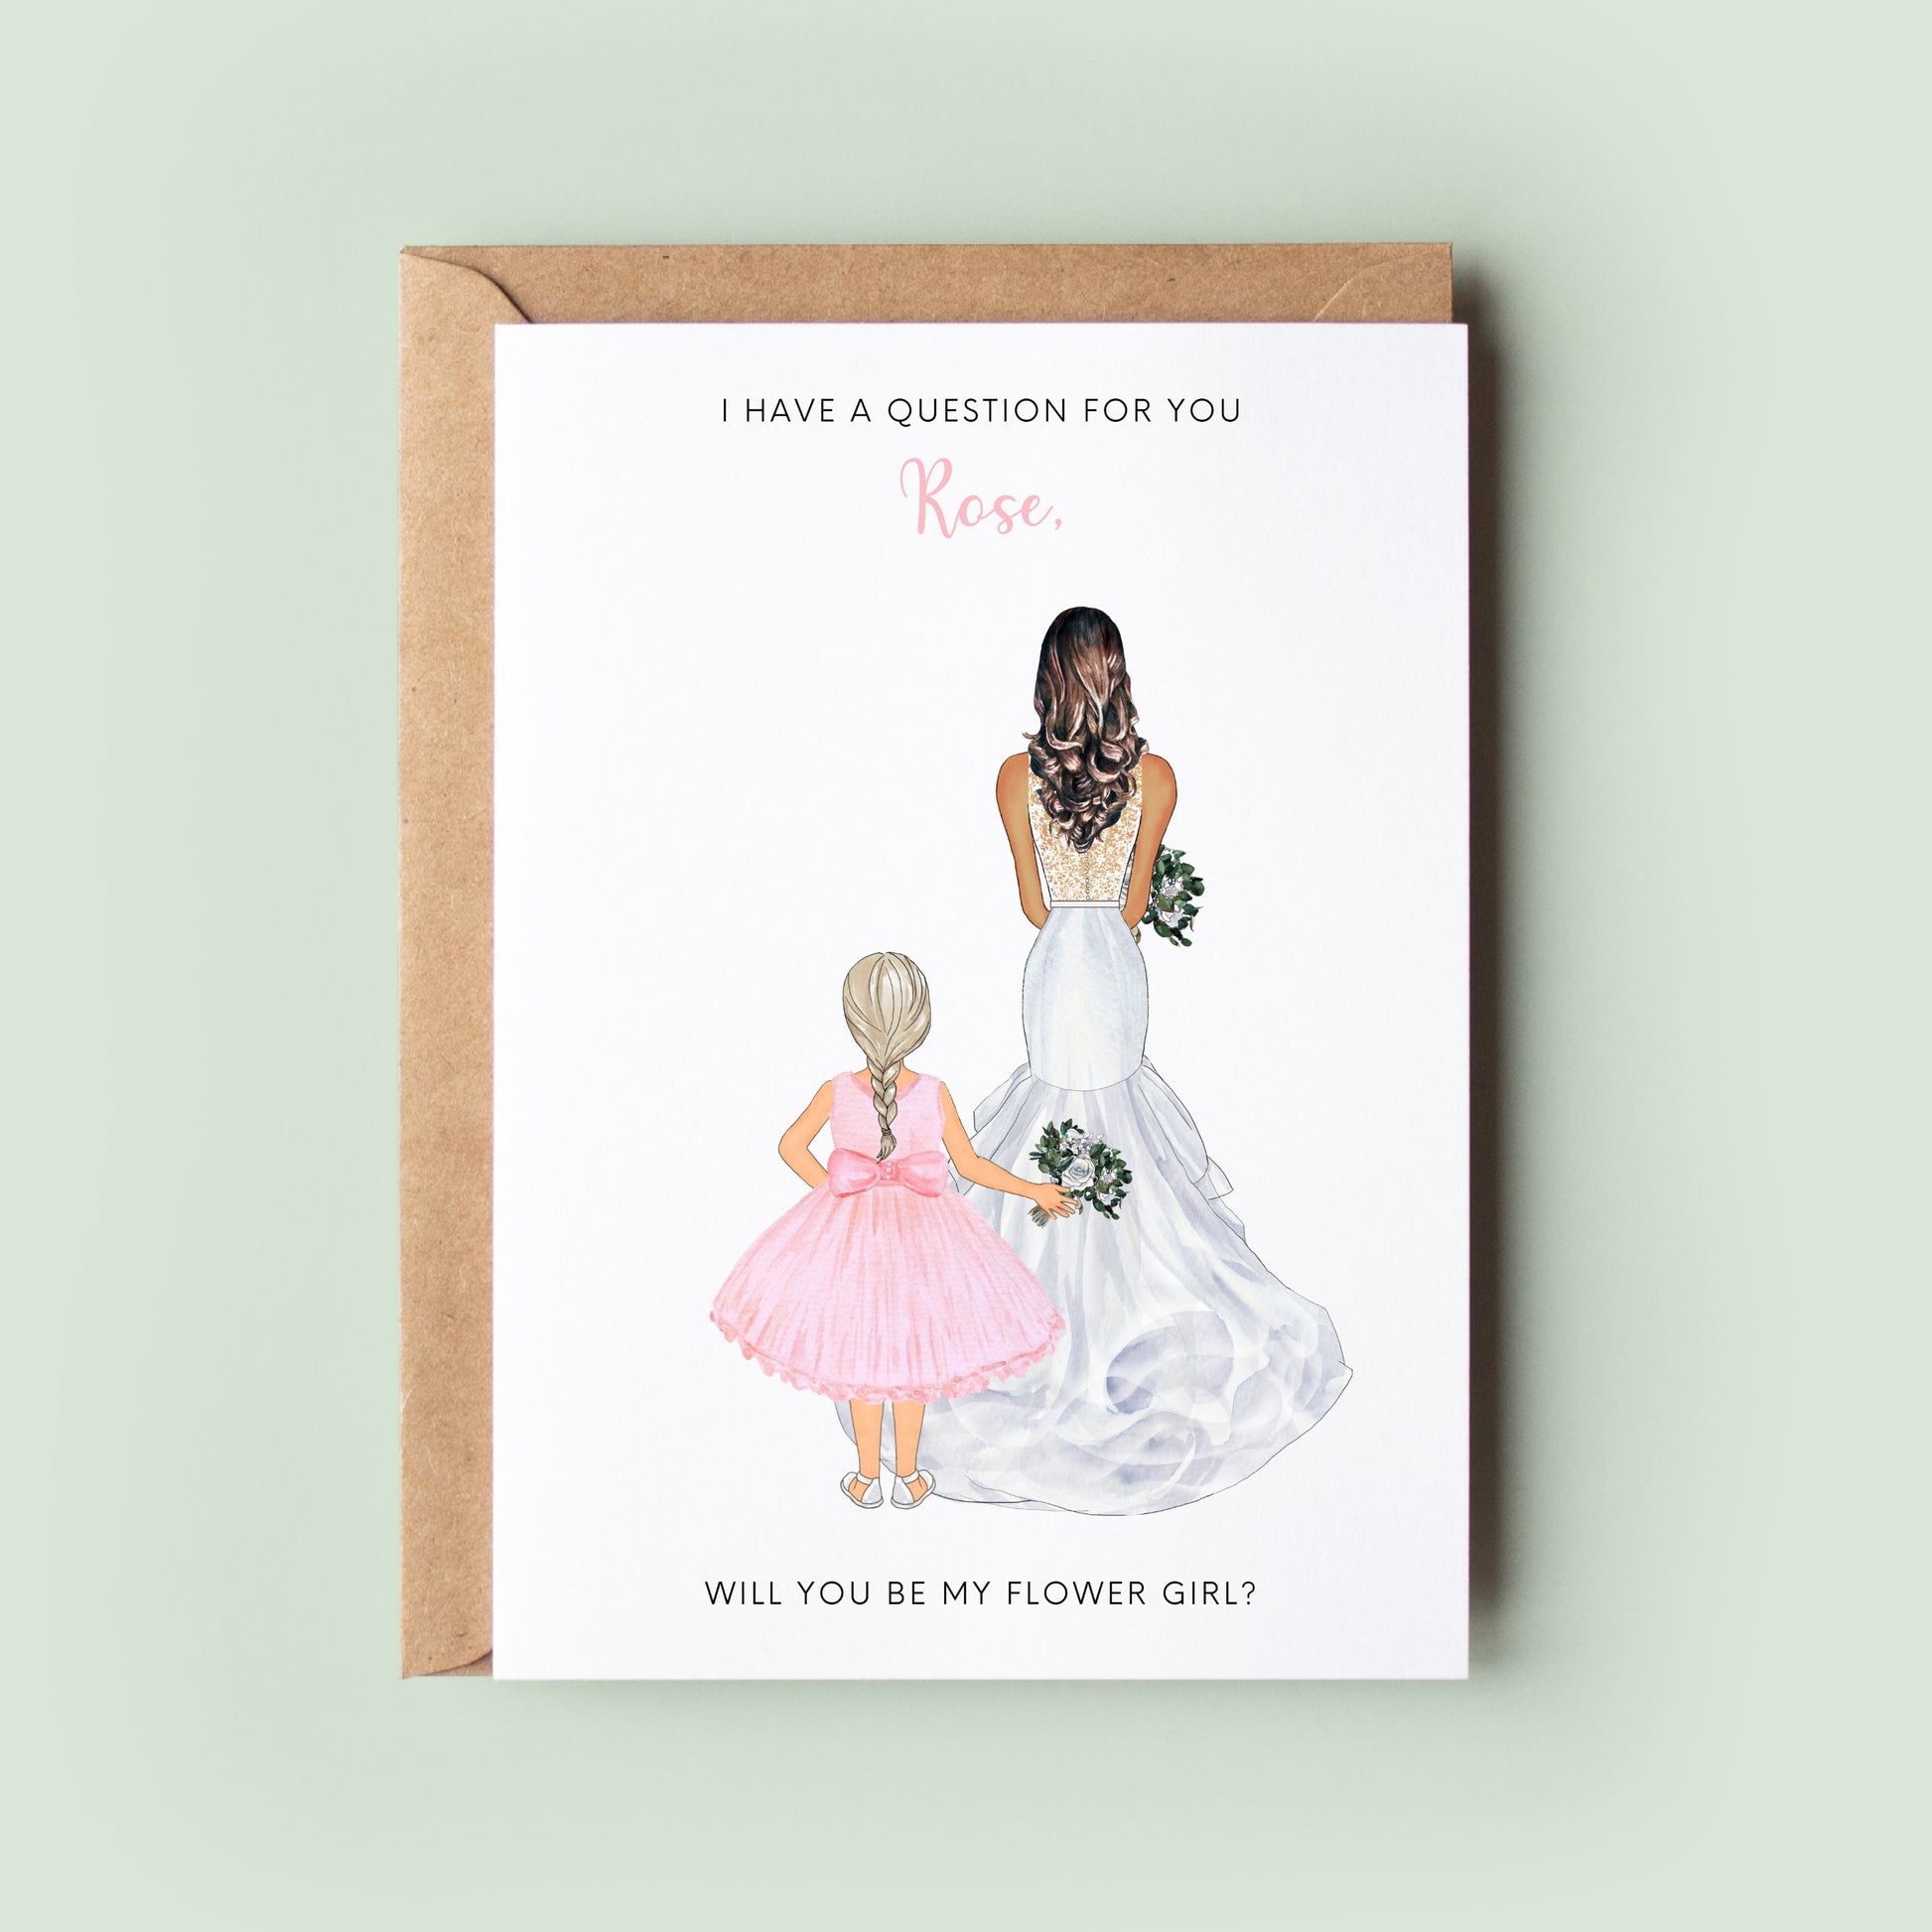 A personalised flower girl proposal card with options to customise the outfit, hairstyle, and skin tone of the illustrated figure.